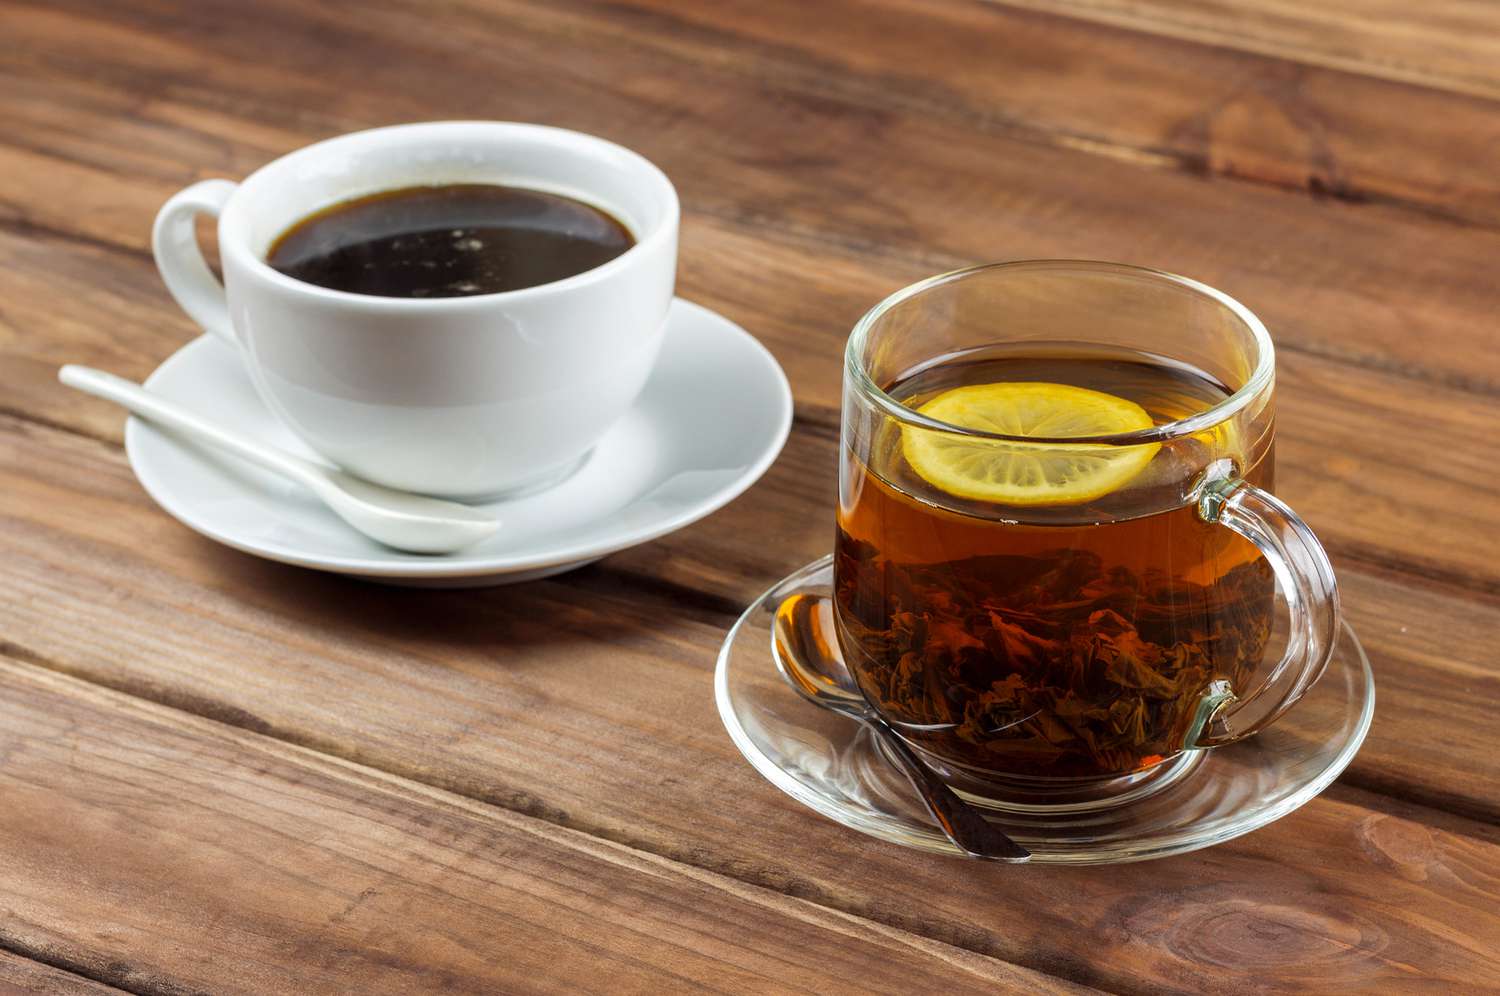 Tea vs. Coffee, Which Drink Is Healthier for You?